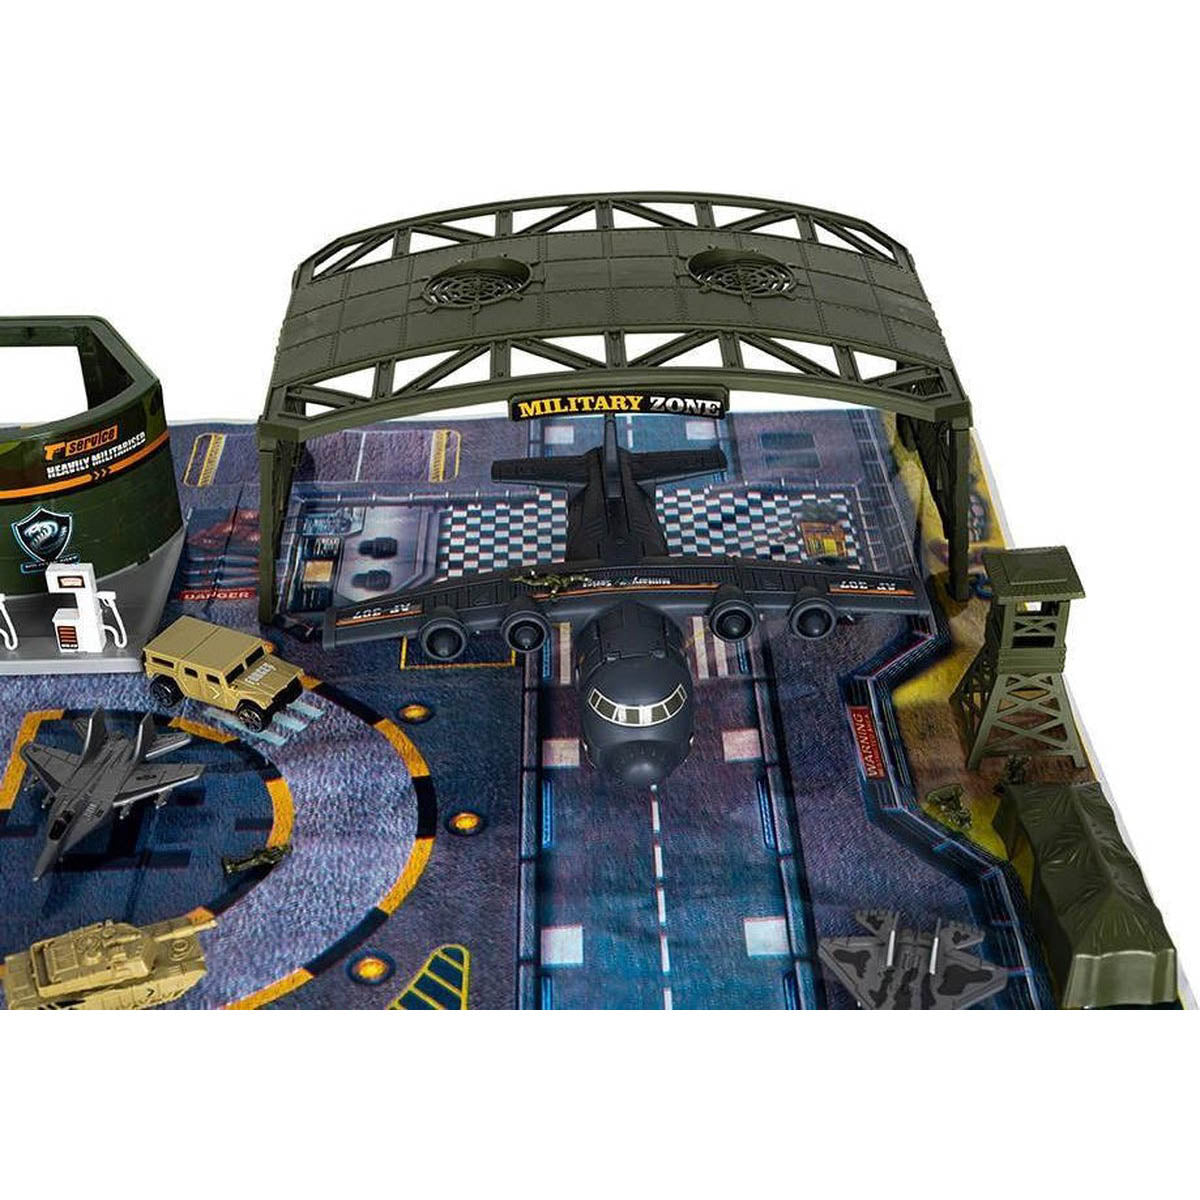 <tc>Ariko</tc> Luxury Special forces airfield | Military Air Base | Airport Toy set | with toy rug | Parking | Garage | Gas station | 3 aircraft | 1 helicopter | 1 army tank | 3 vehicles